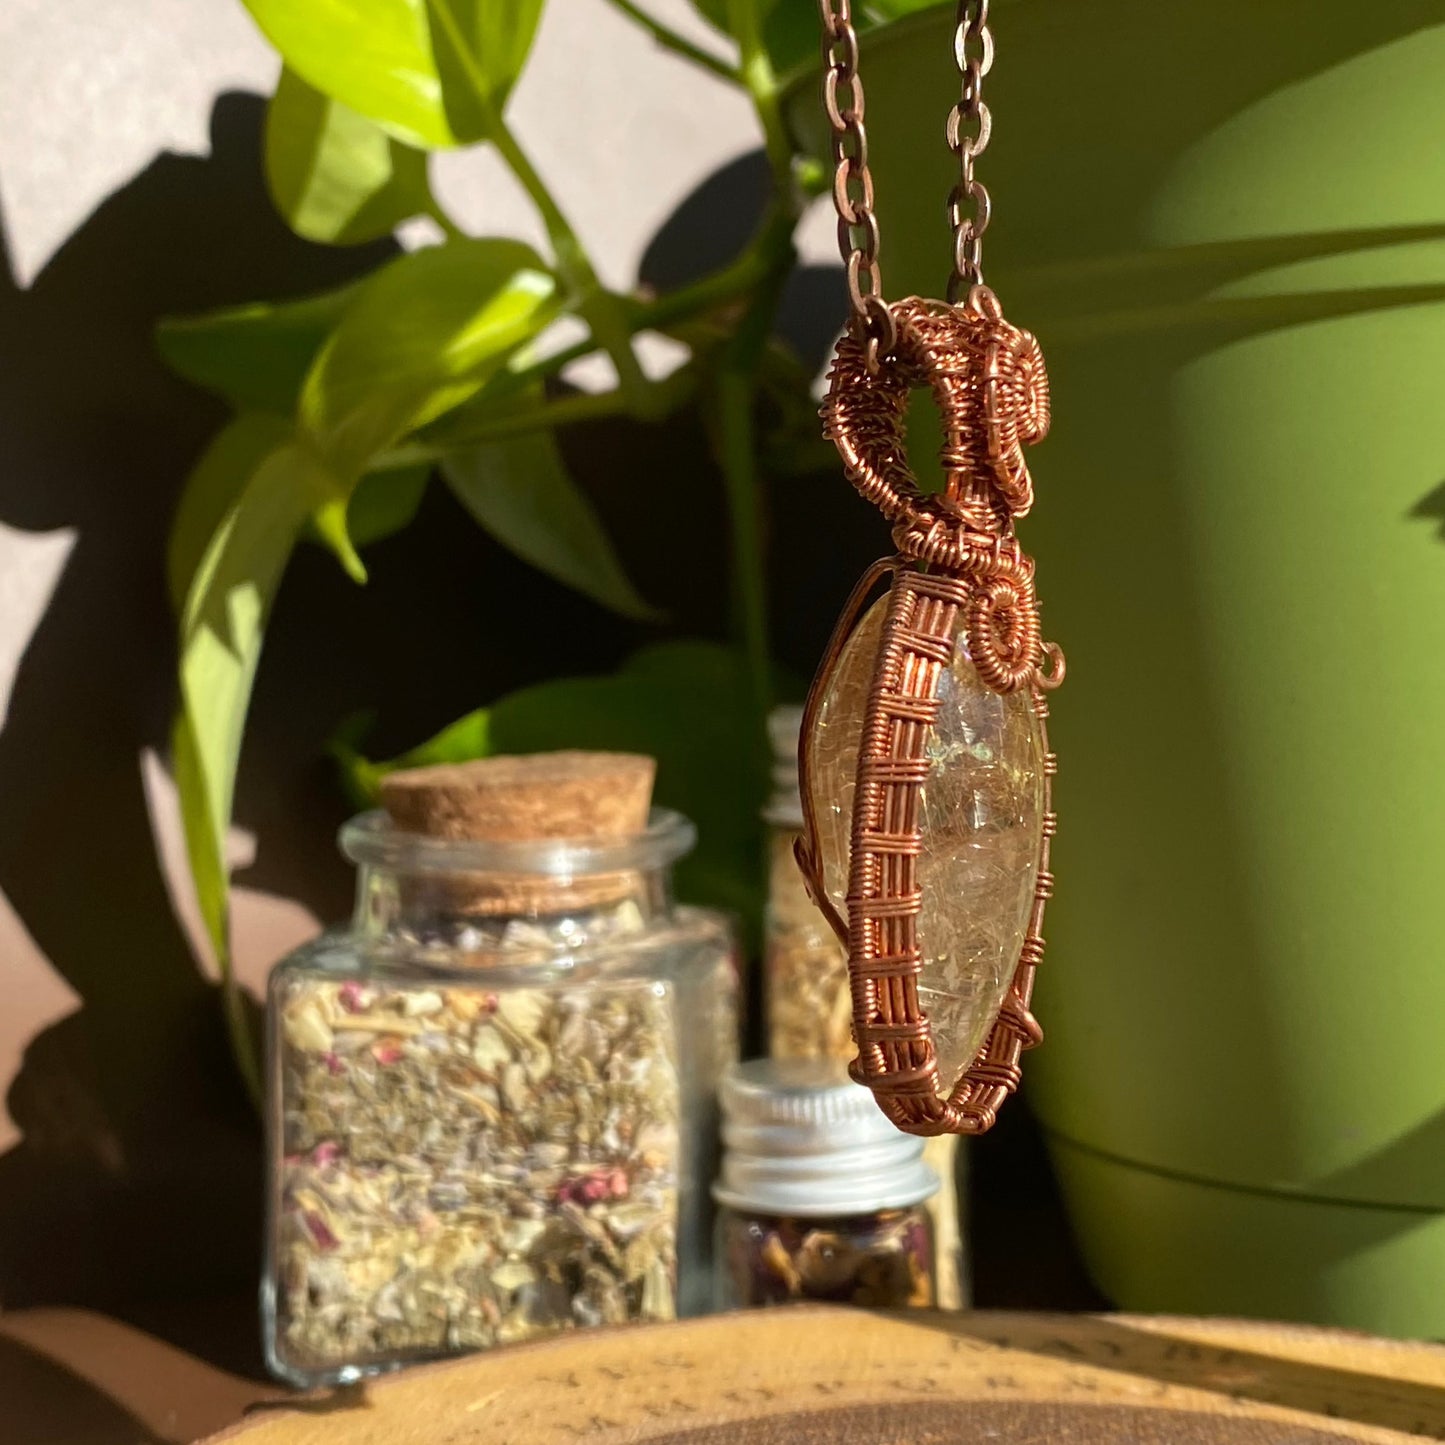 Artisan-Crafted Copper Rutile in Quartz Wire-Wrapped Pendant